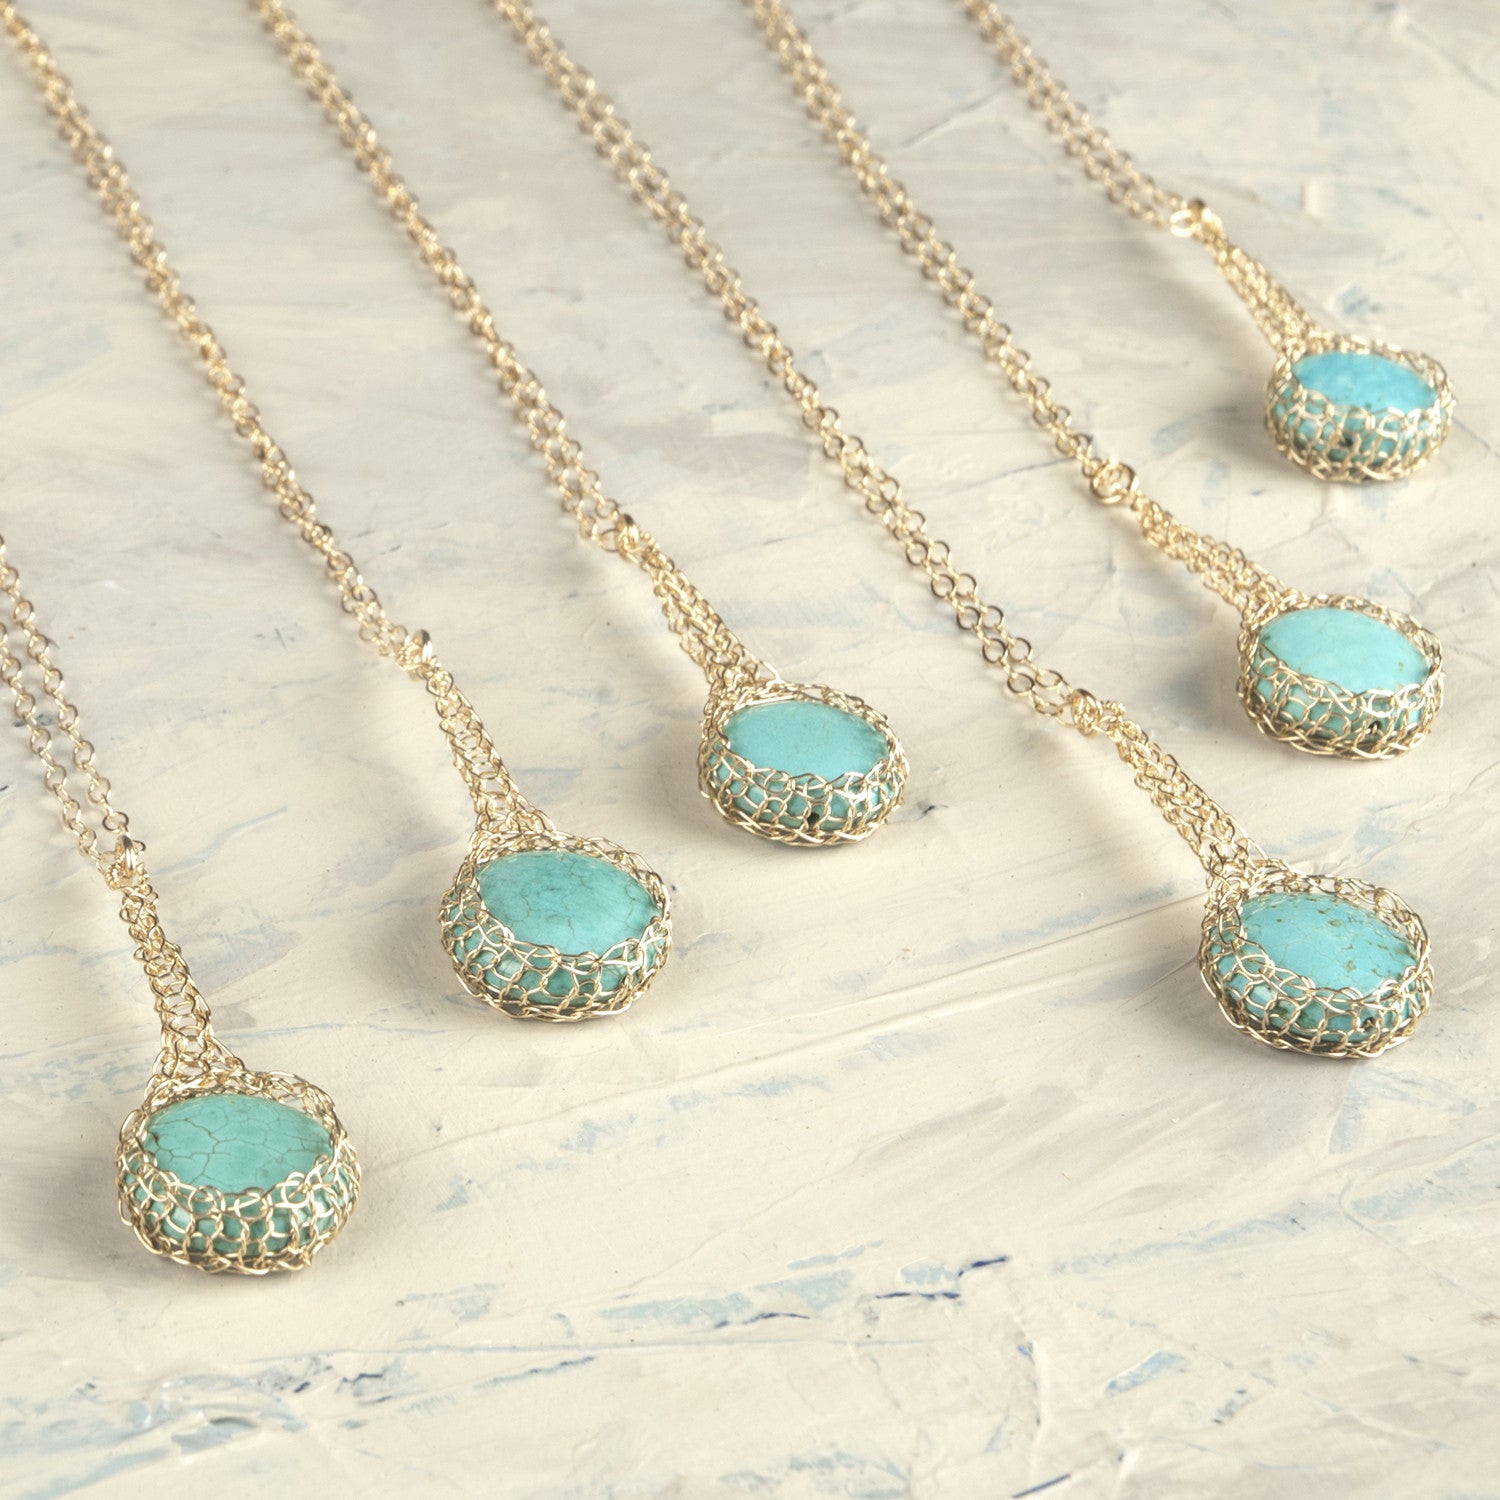 Turquoise pendant necklace in gold 